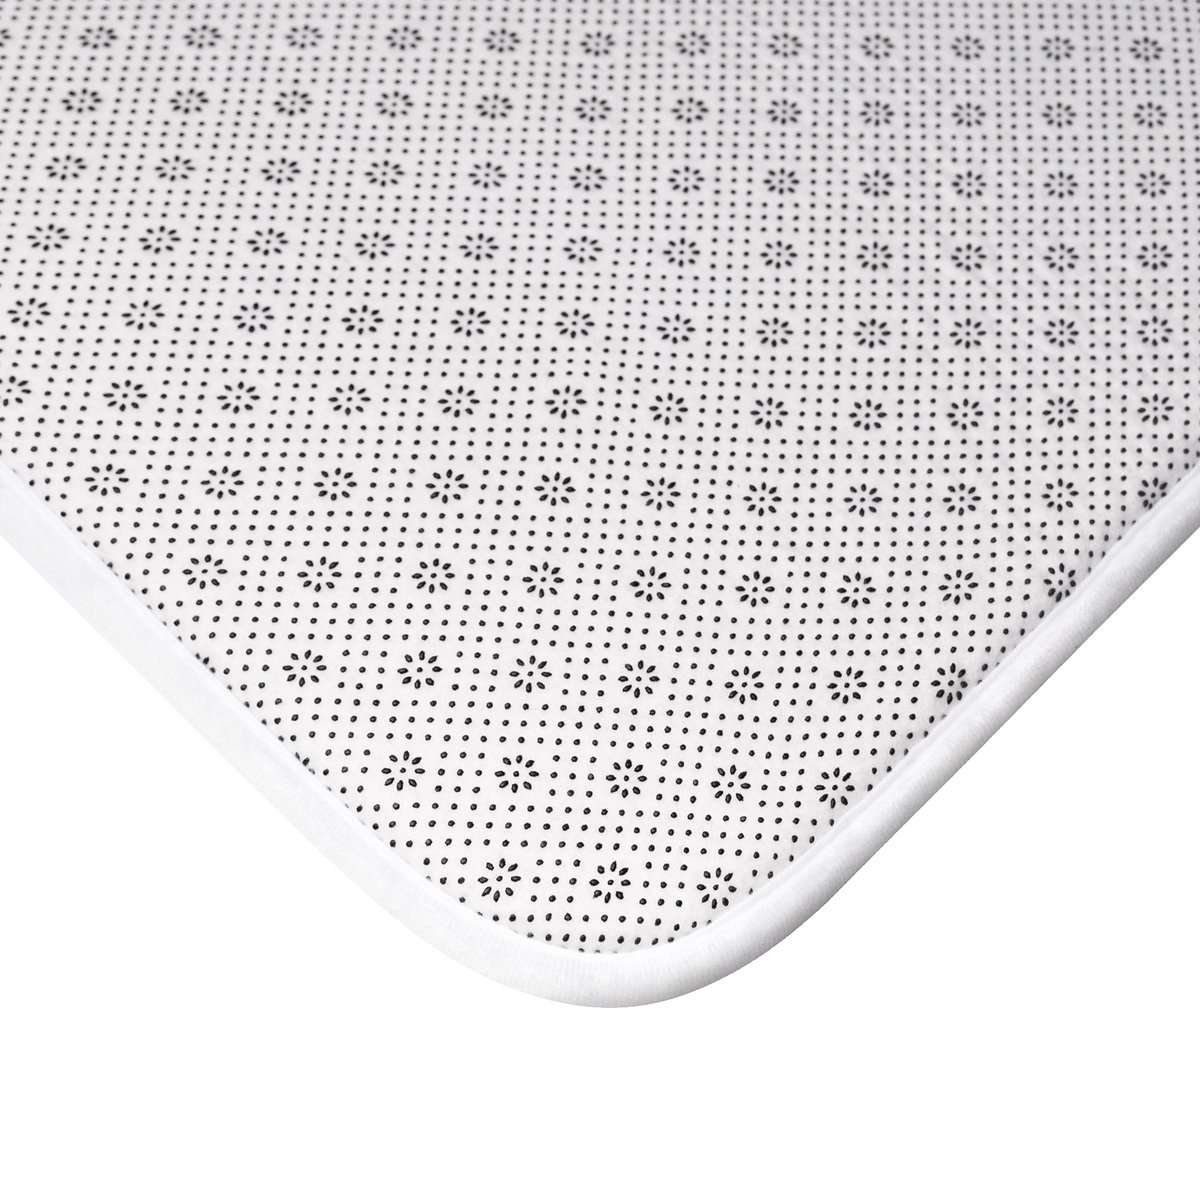 where-you-can-buy-all-your-openness-bath-mat-online-hot-sale_2.jpg